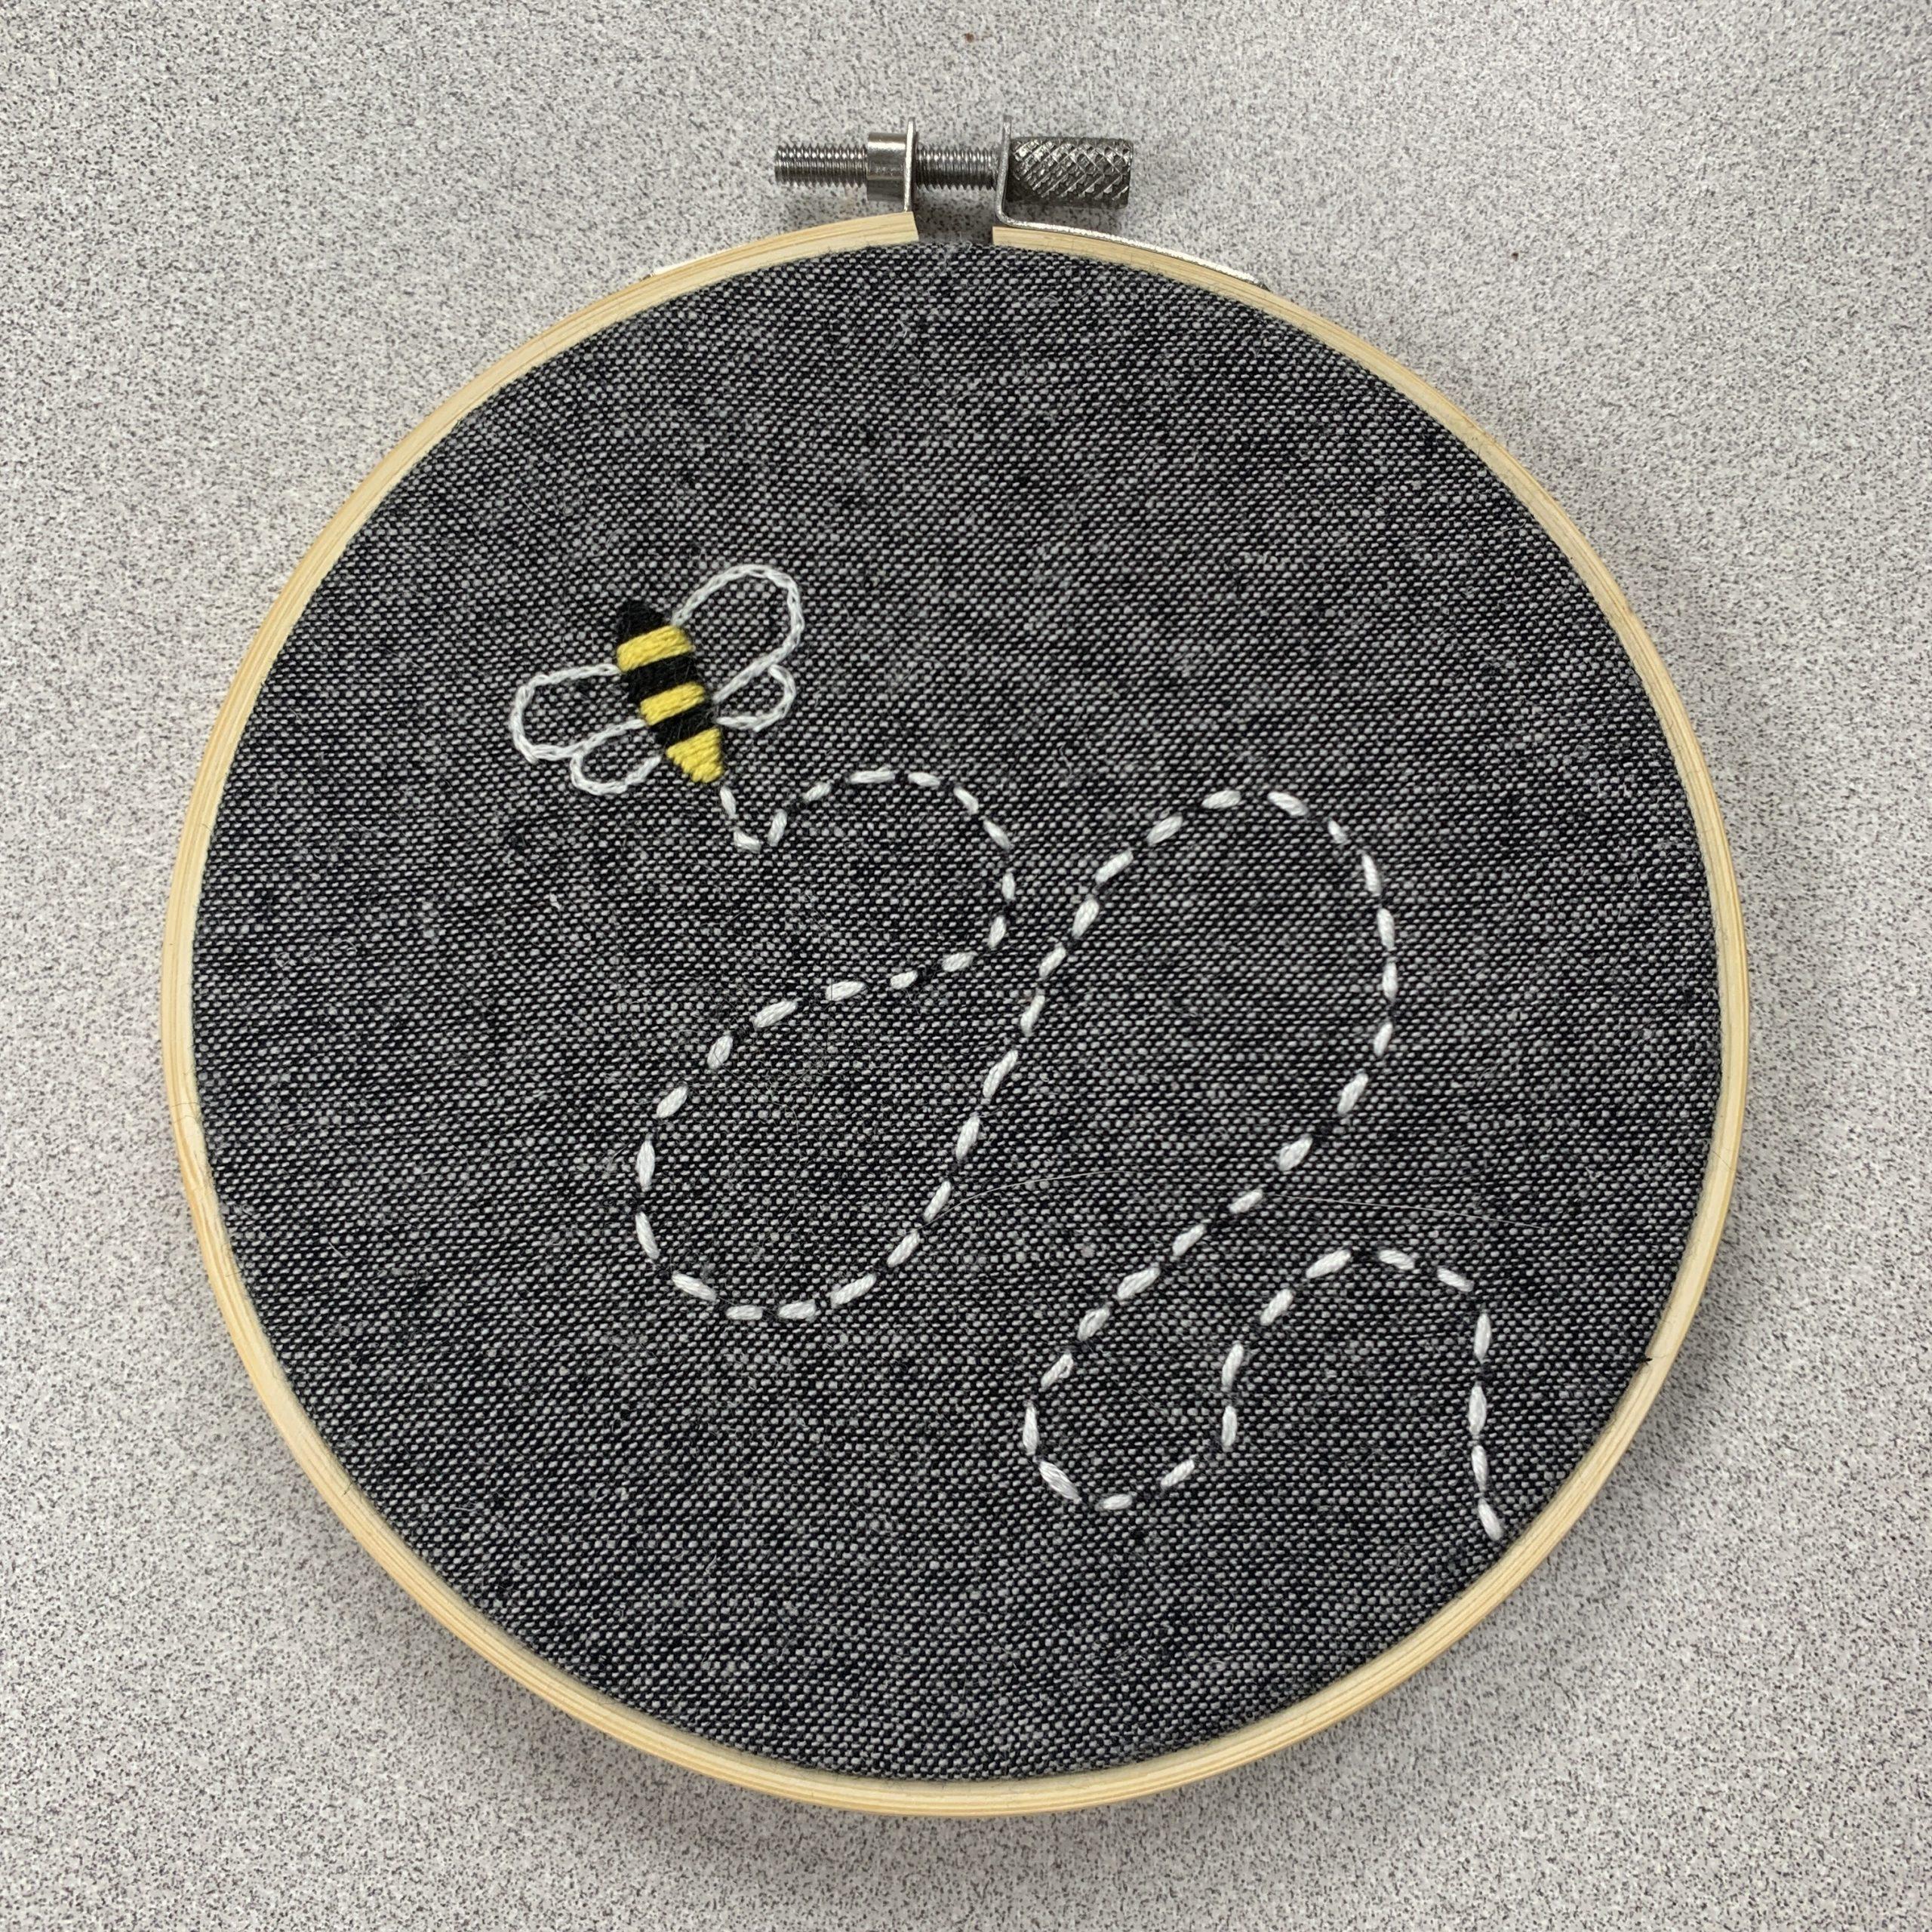 Embroidery project depicting a bee doing a waggle dance